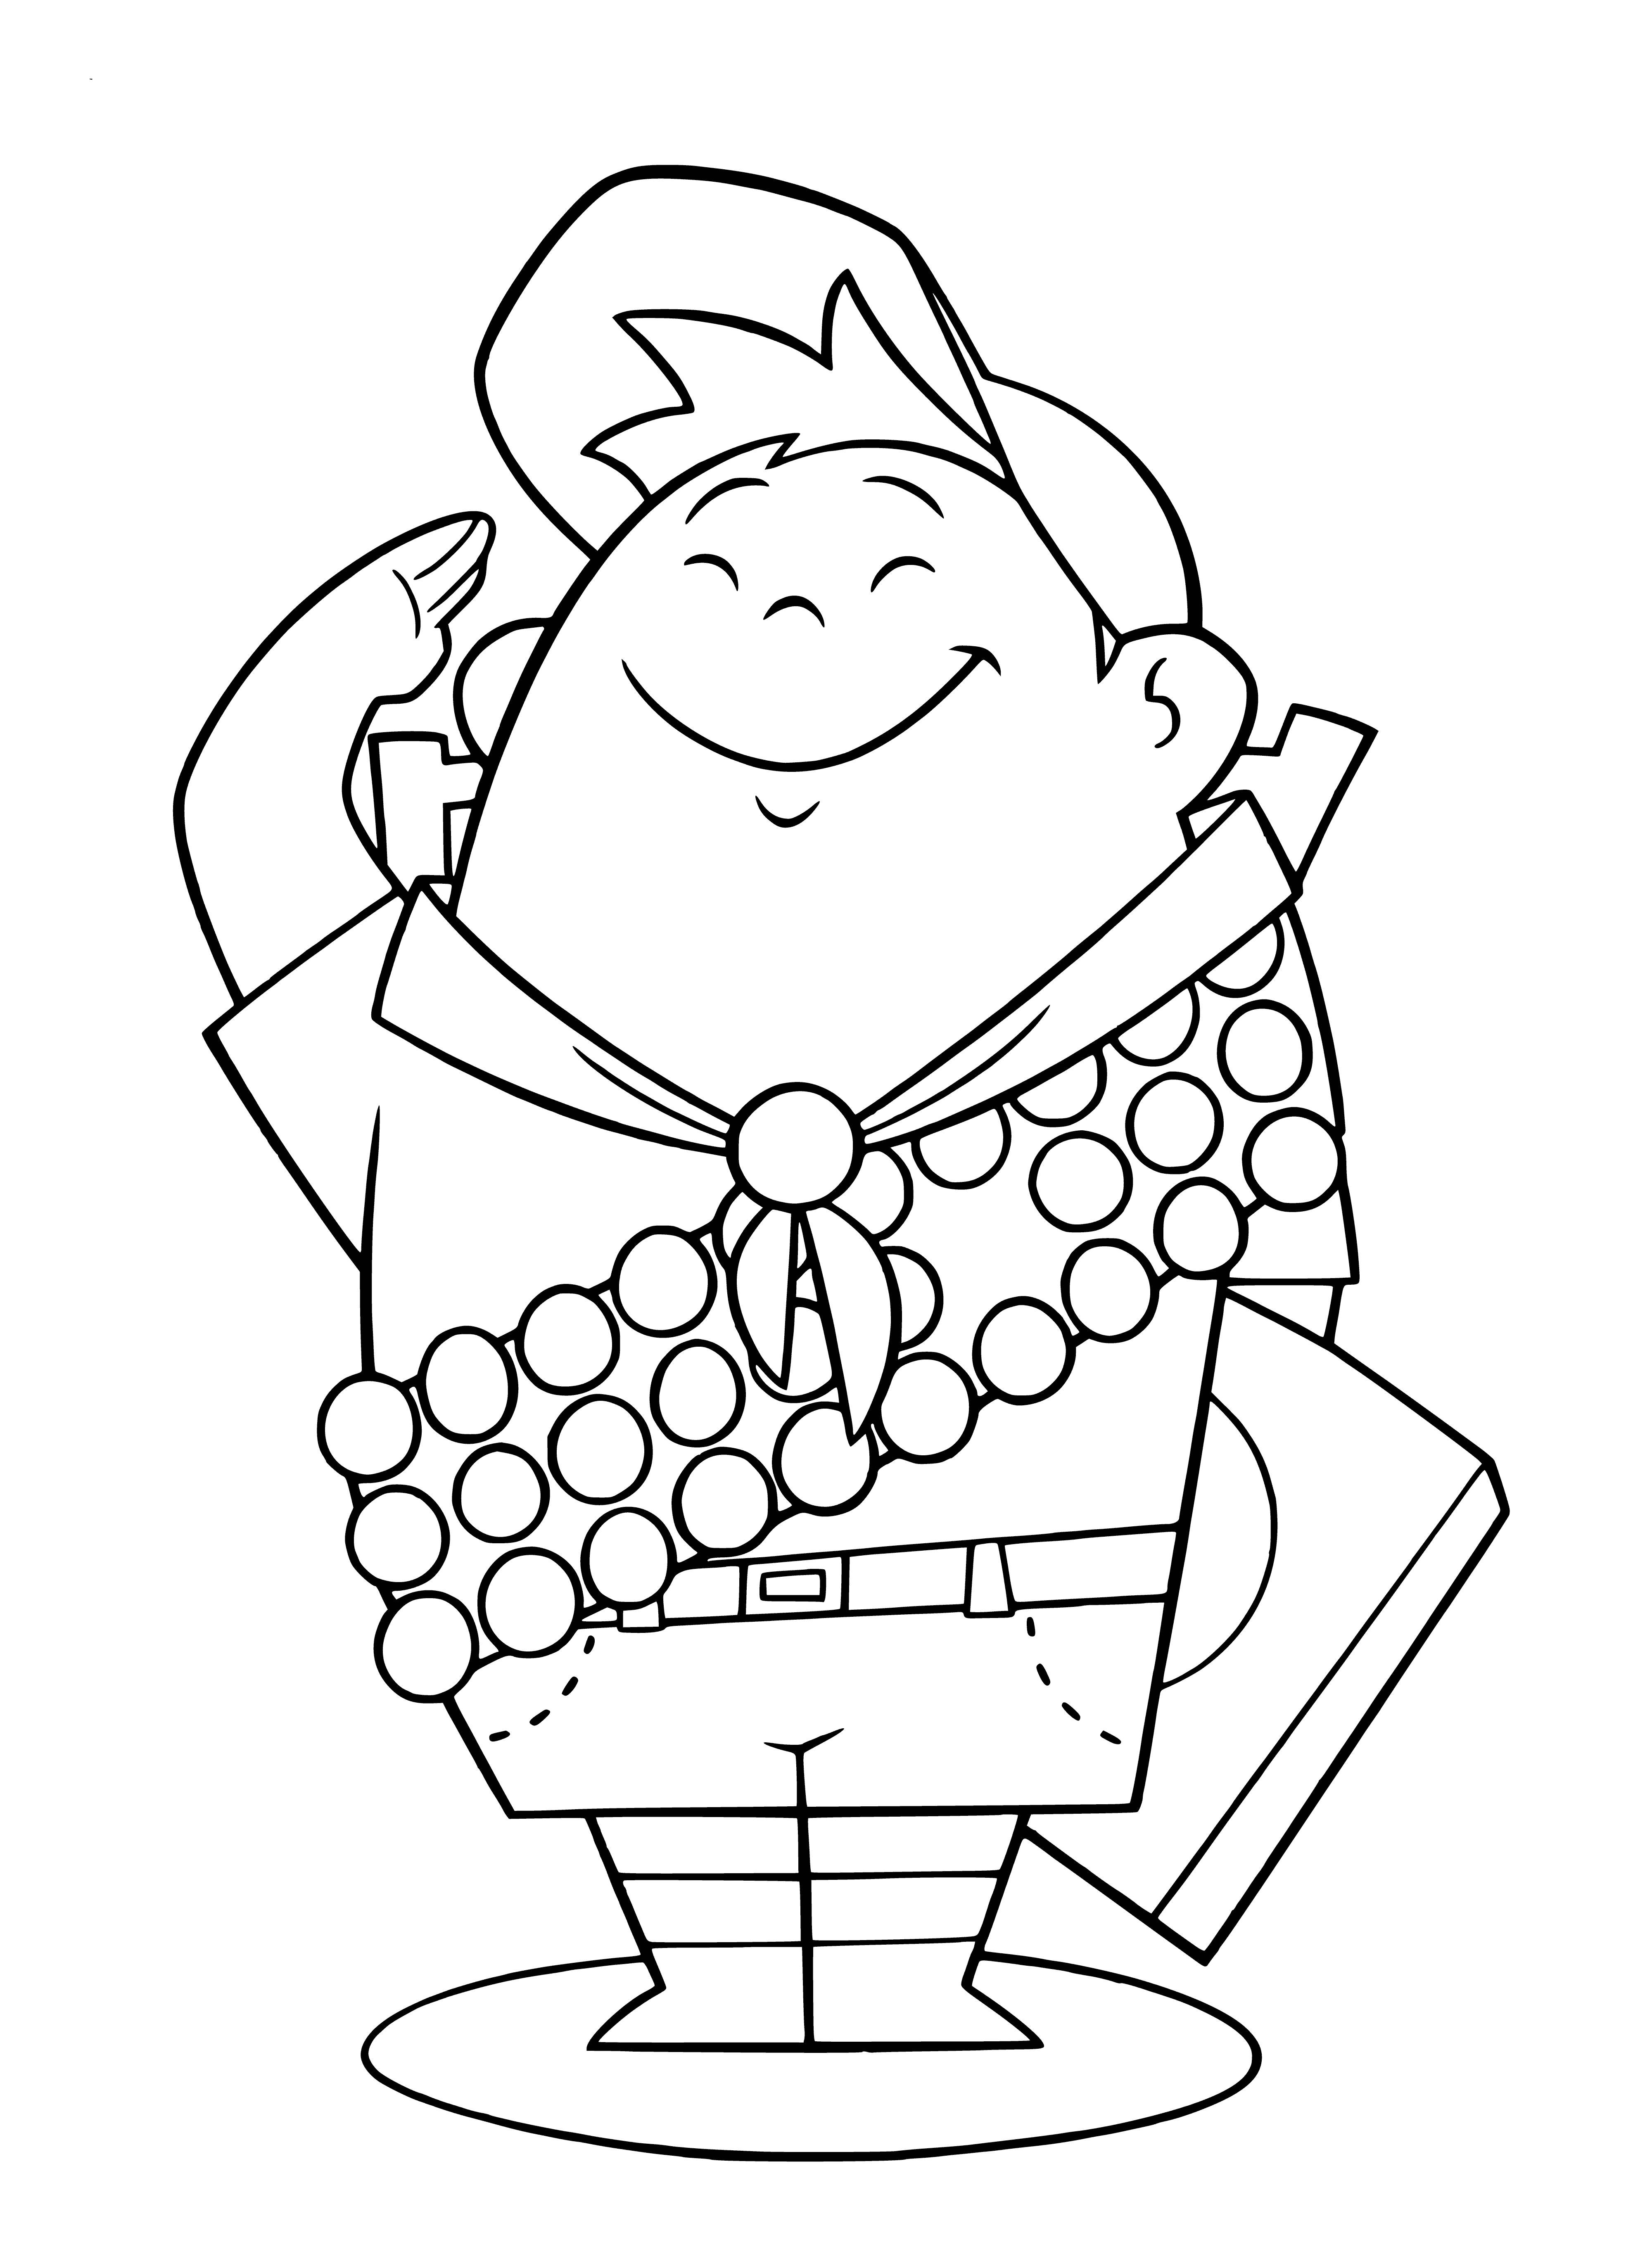 coloring page: Young scout Russel salutes, in uniform w/ neckerchief, belt & pockets, hair combed, serious look on face.